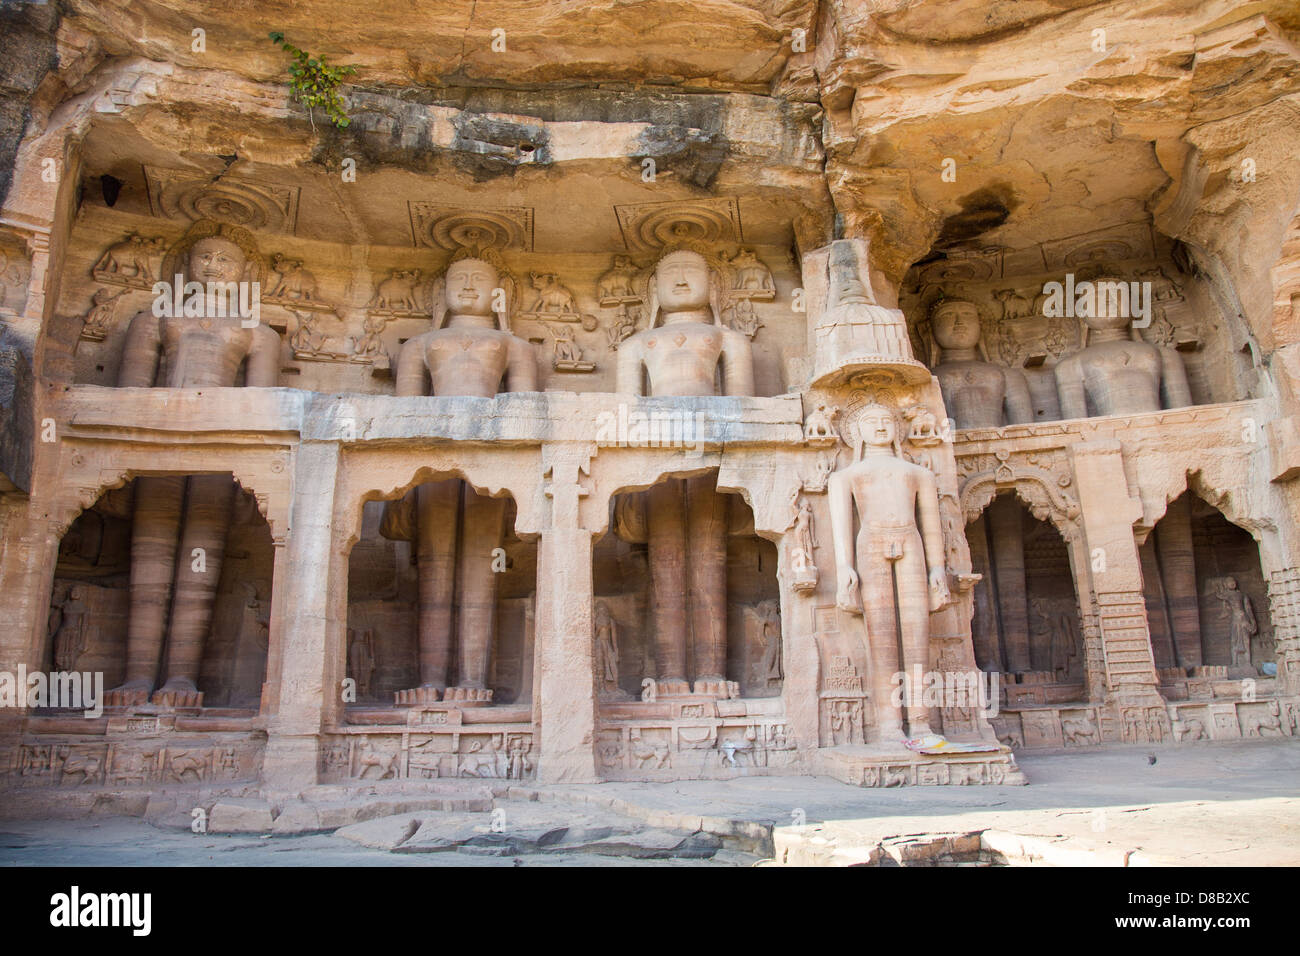 Jain sculptures on route to Gwalior fort, Gwalior, Madhya Pradesh, India Stock Photo